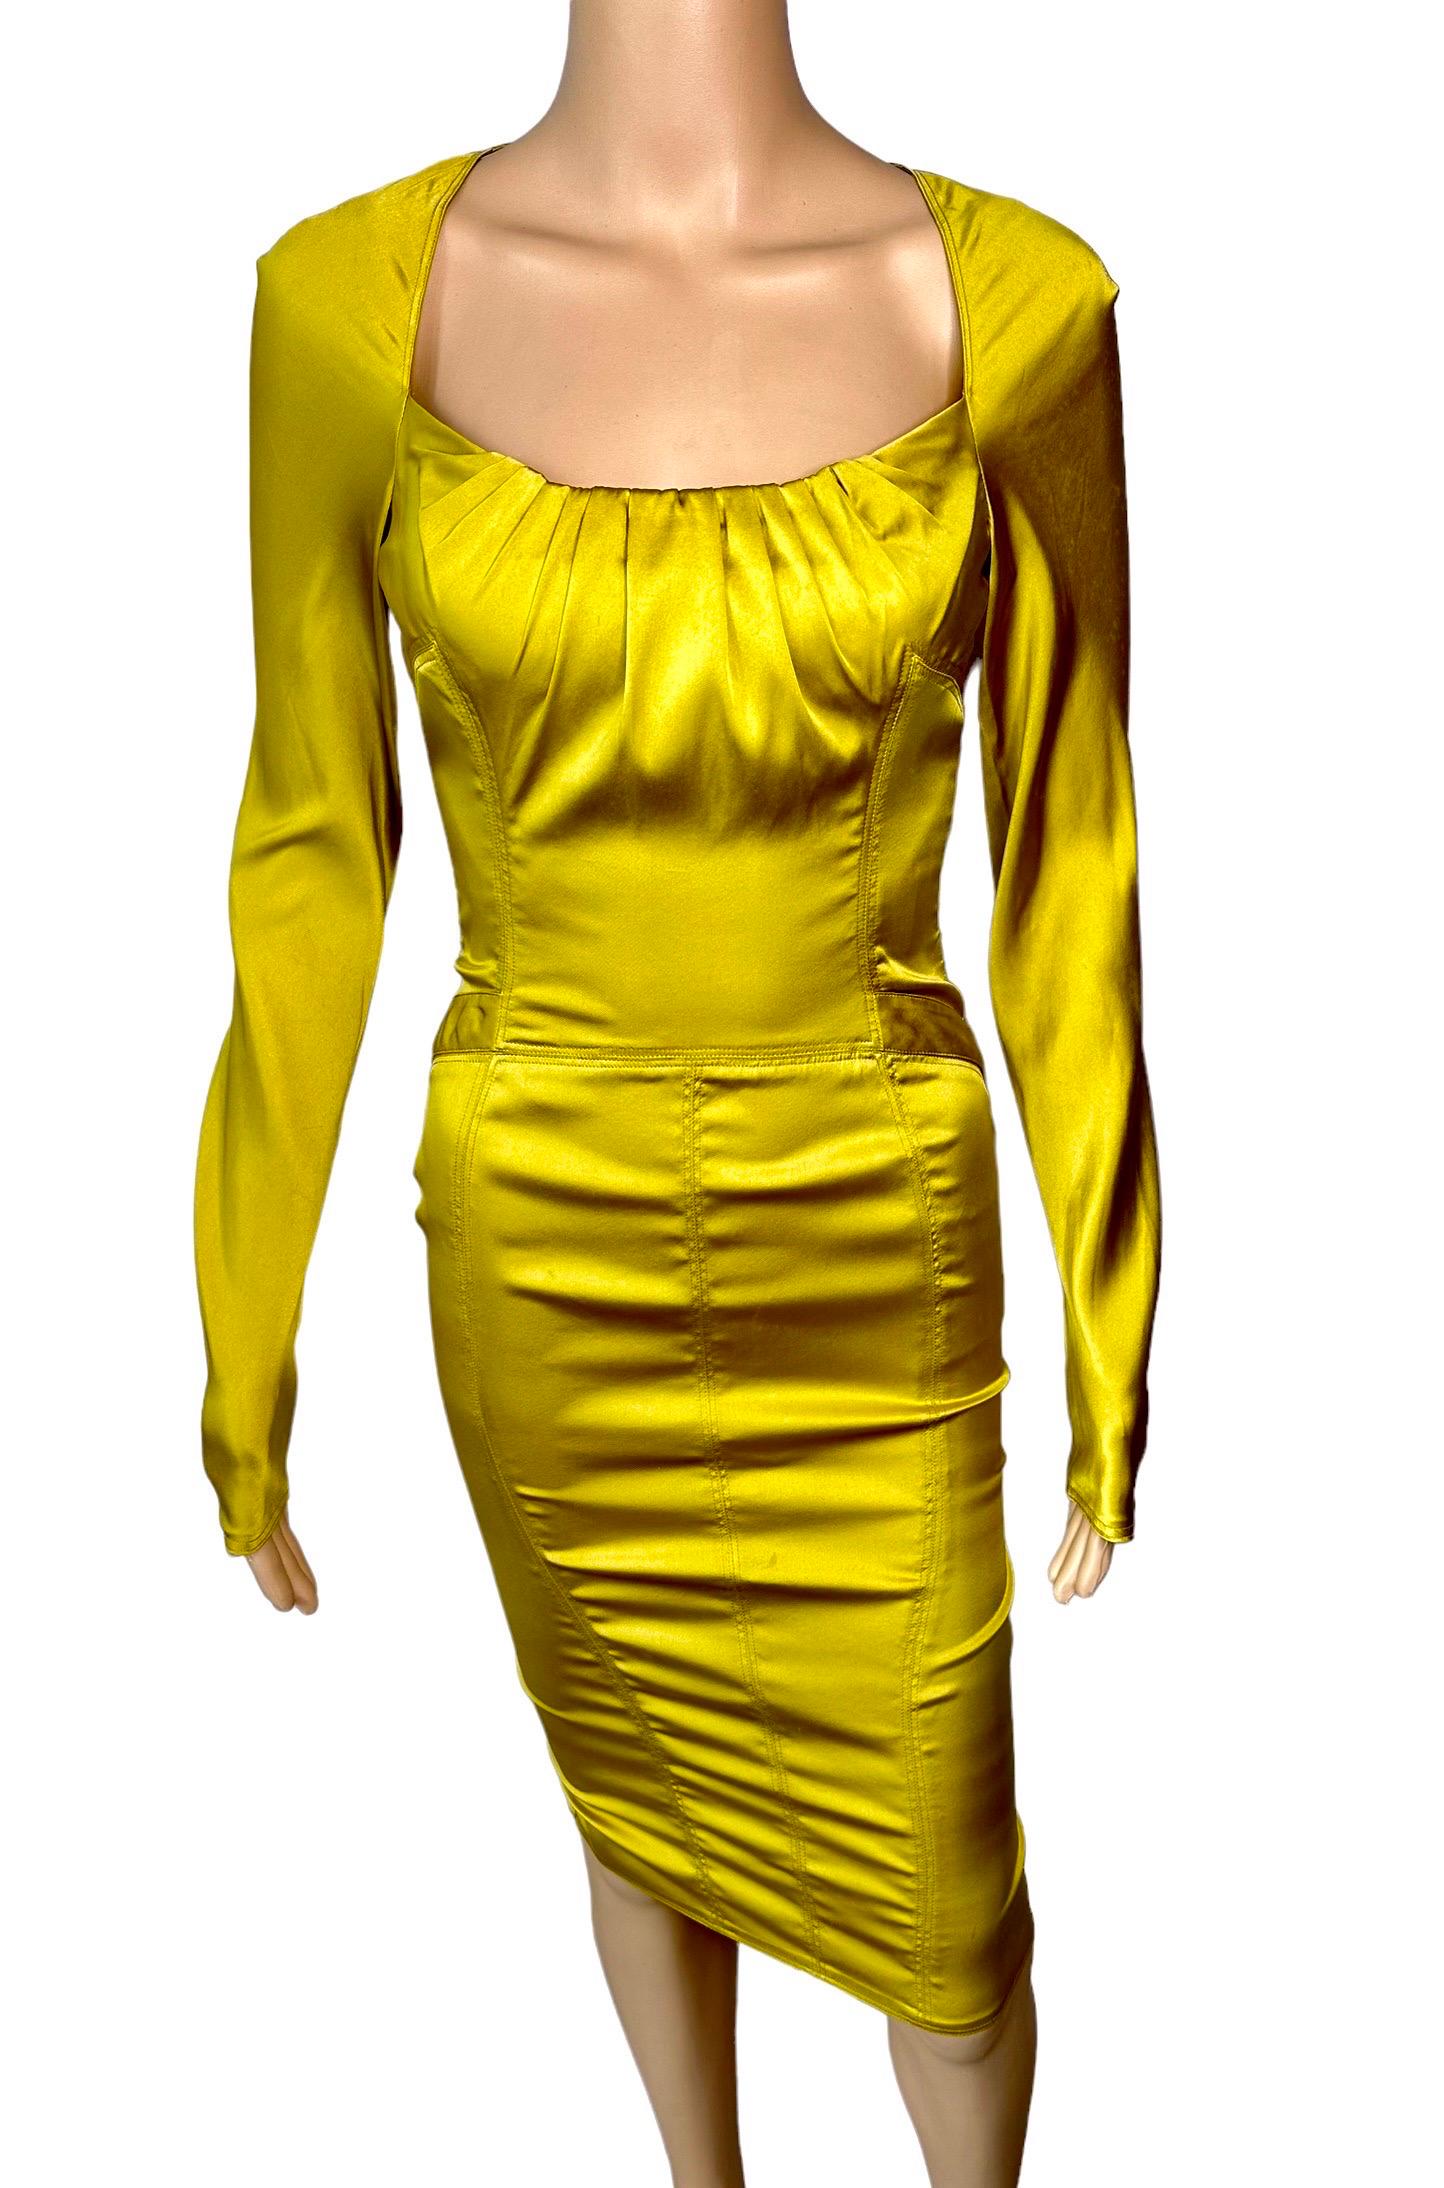 Tom Ford for Gucci F/W 2003 Runway Bodycon Silk Mustard Yellow Midi Dress In Good Condition For Sale In Naples, FL